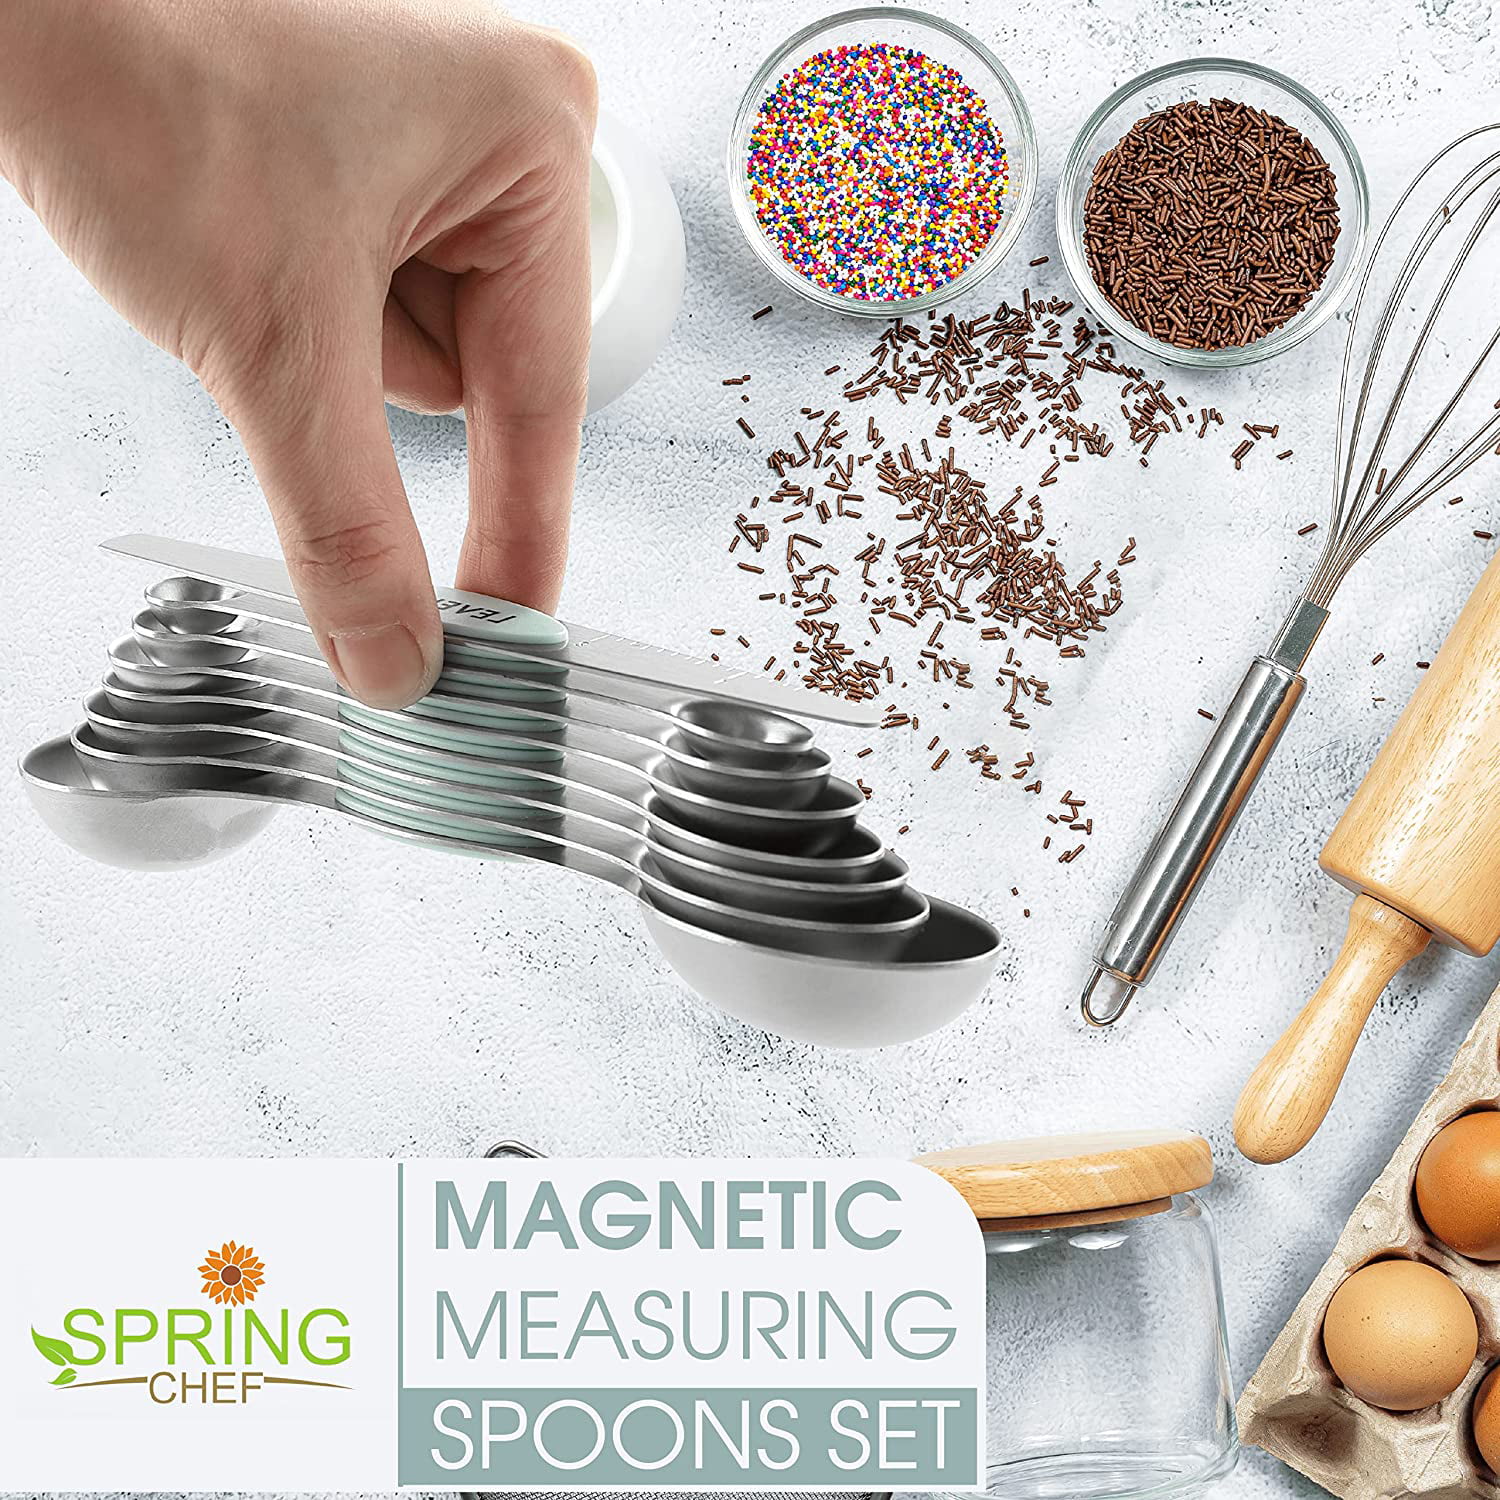 Magneticspring Chef Magnetic Measuring Spoons Set, Dual Sided